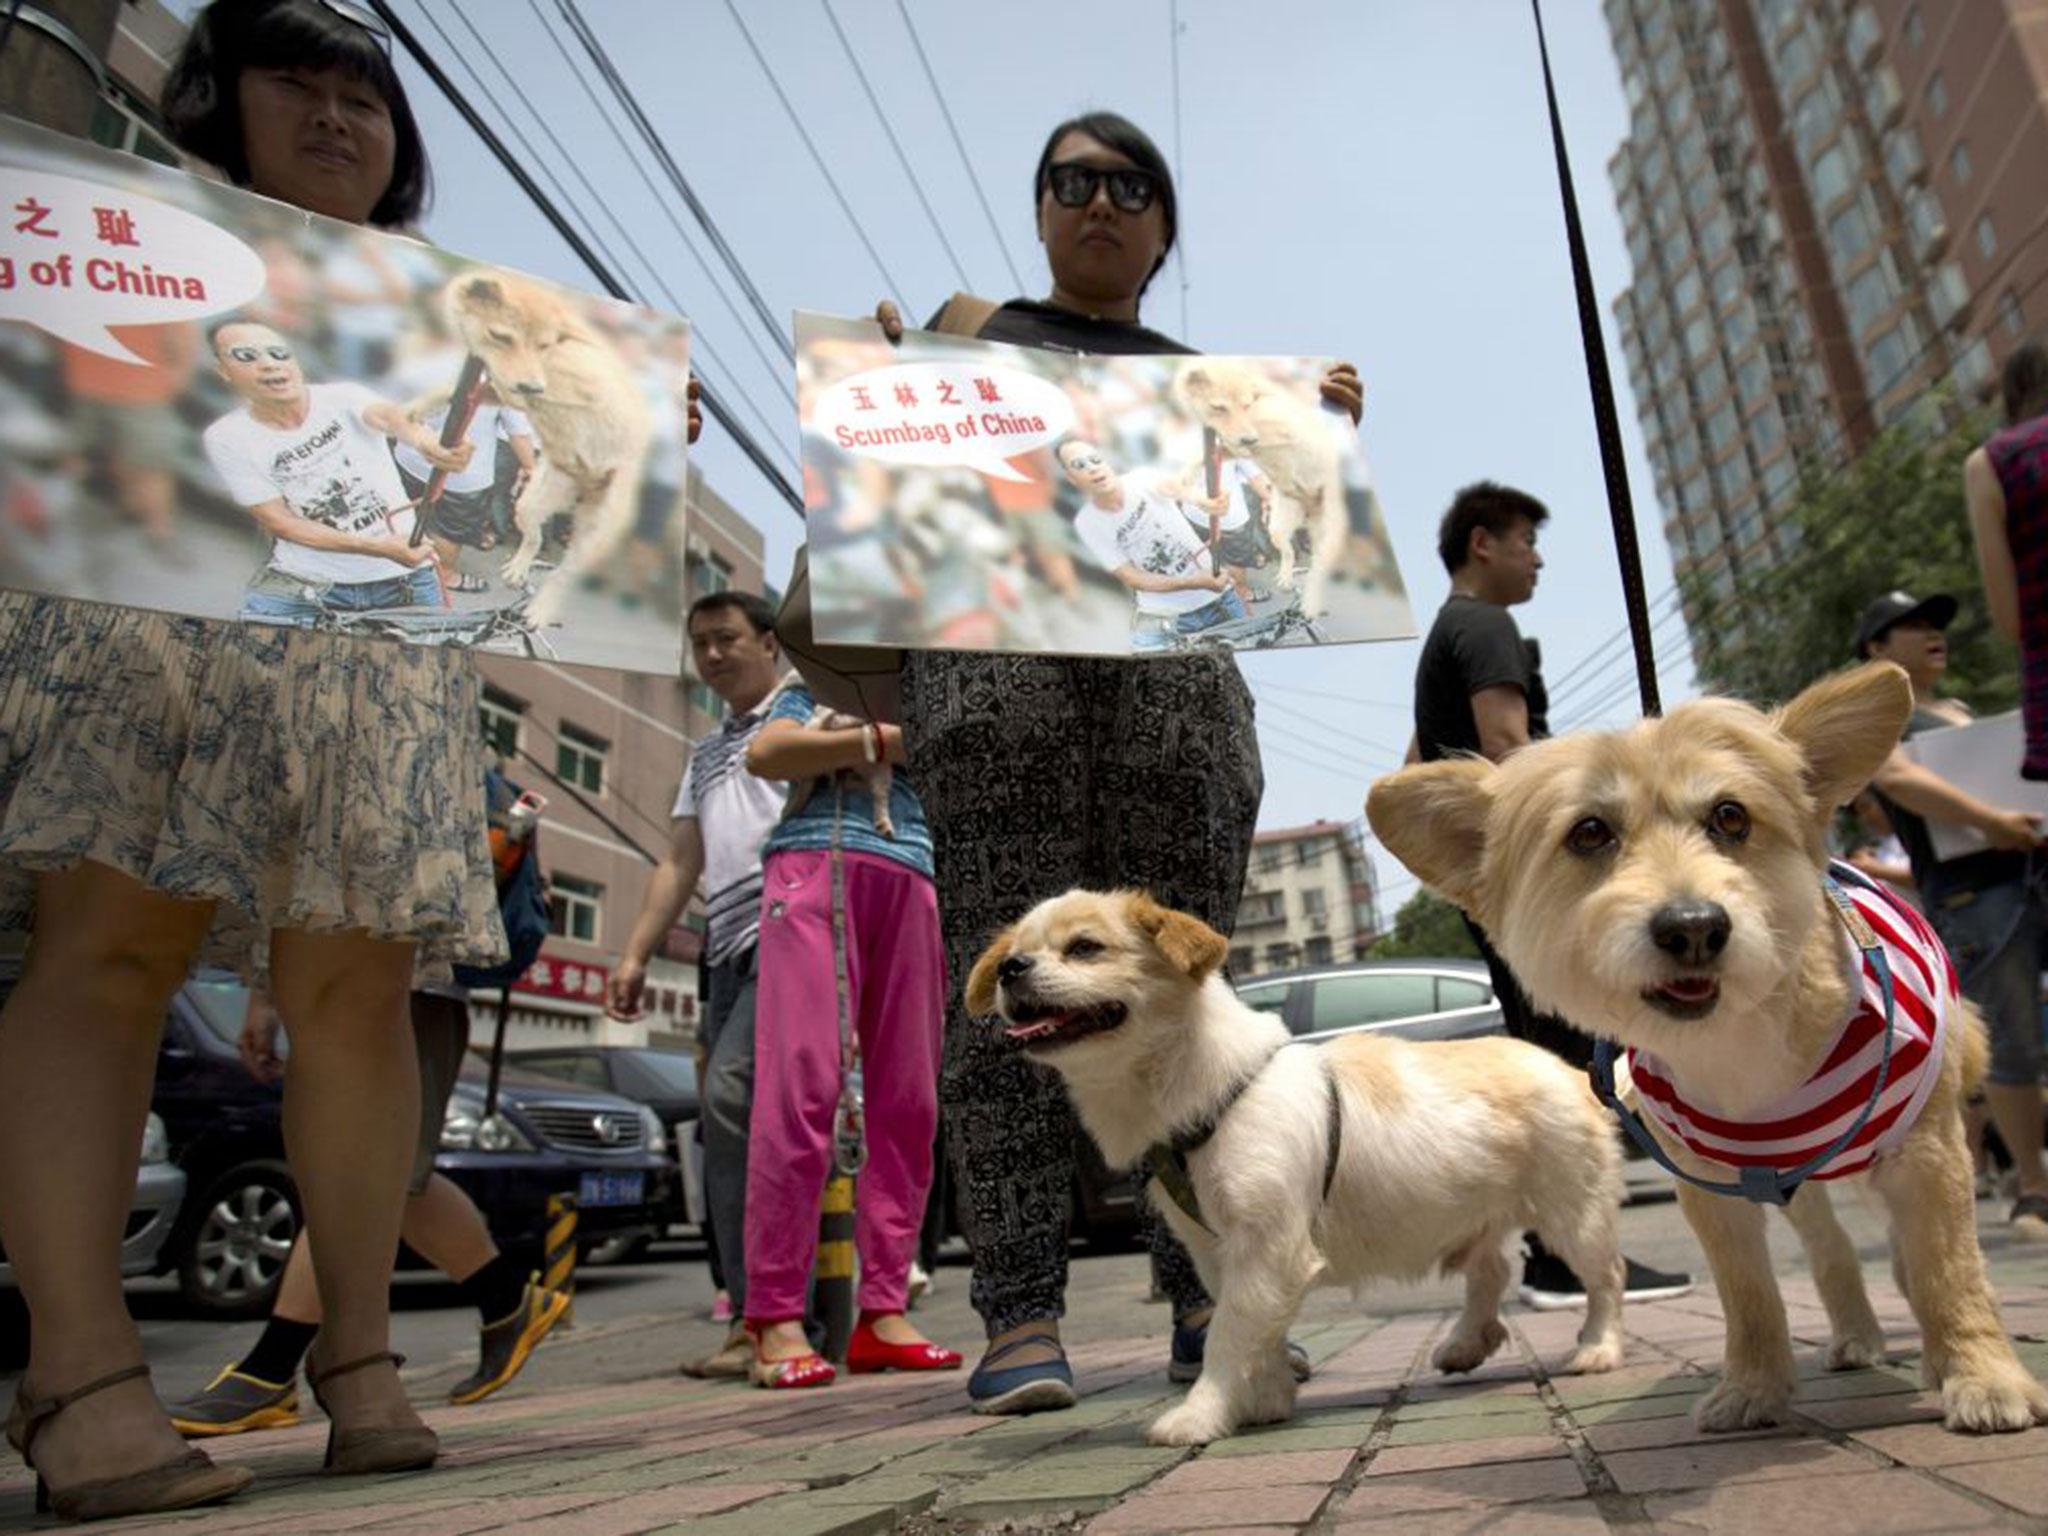 Yulin Dog Meat Festival 2016: 11 million sign petition against annual event  that slaughters thousands of animals | The Independent | The Independent